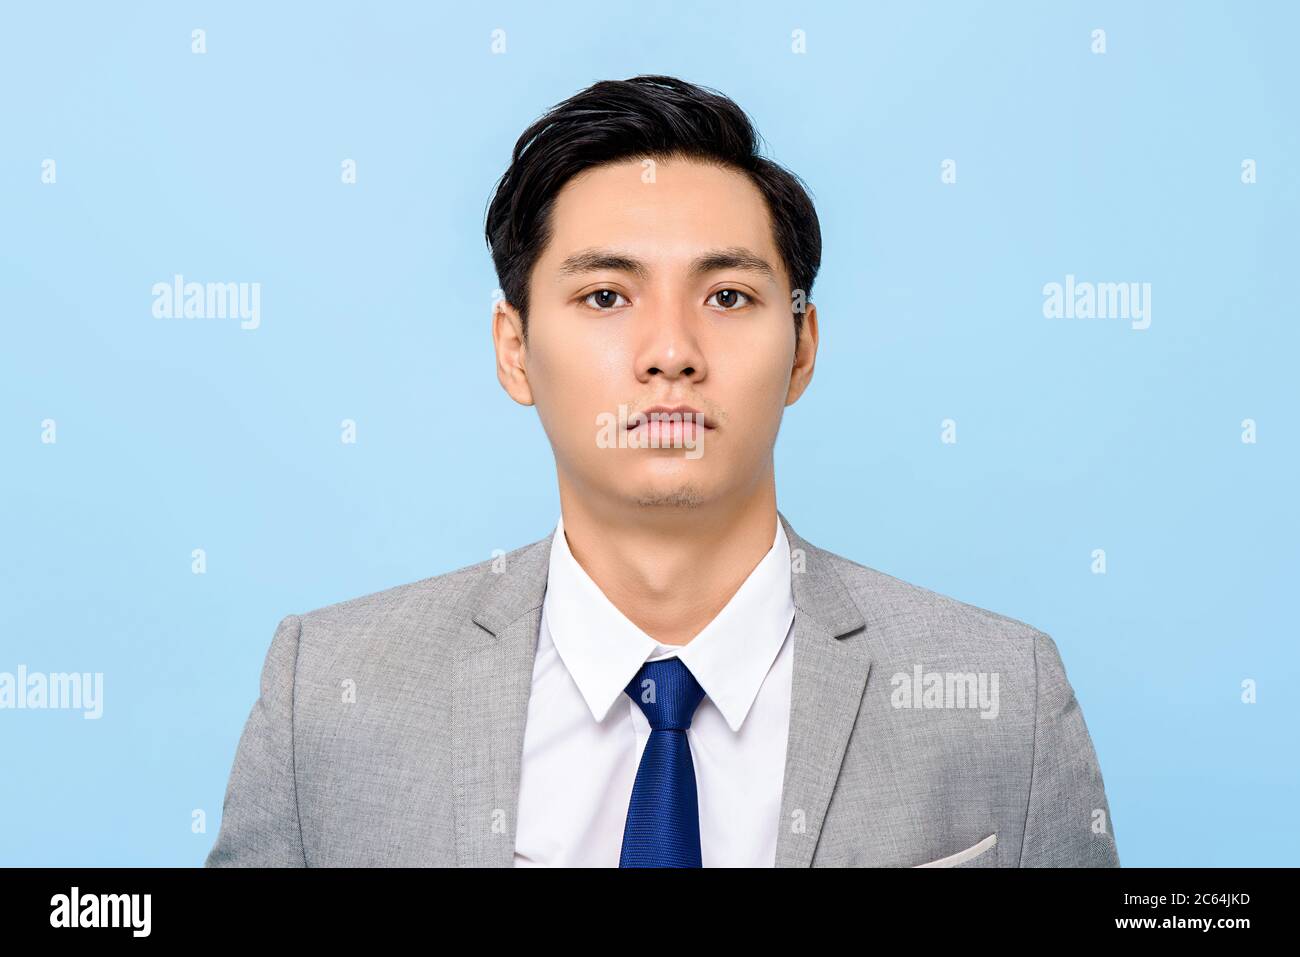 Close up portrait of serious young Asian businessman looking at camera in isolated studio blue background Stock Photo